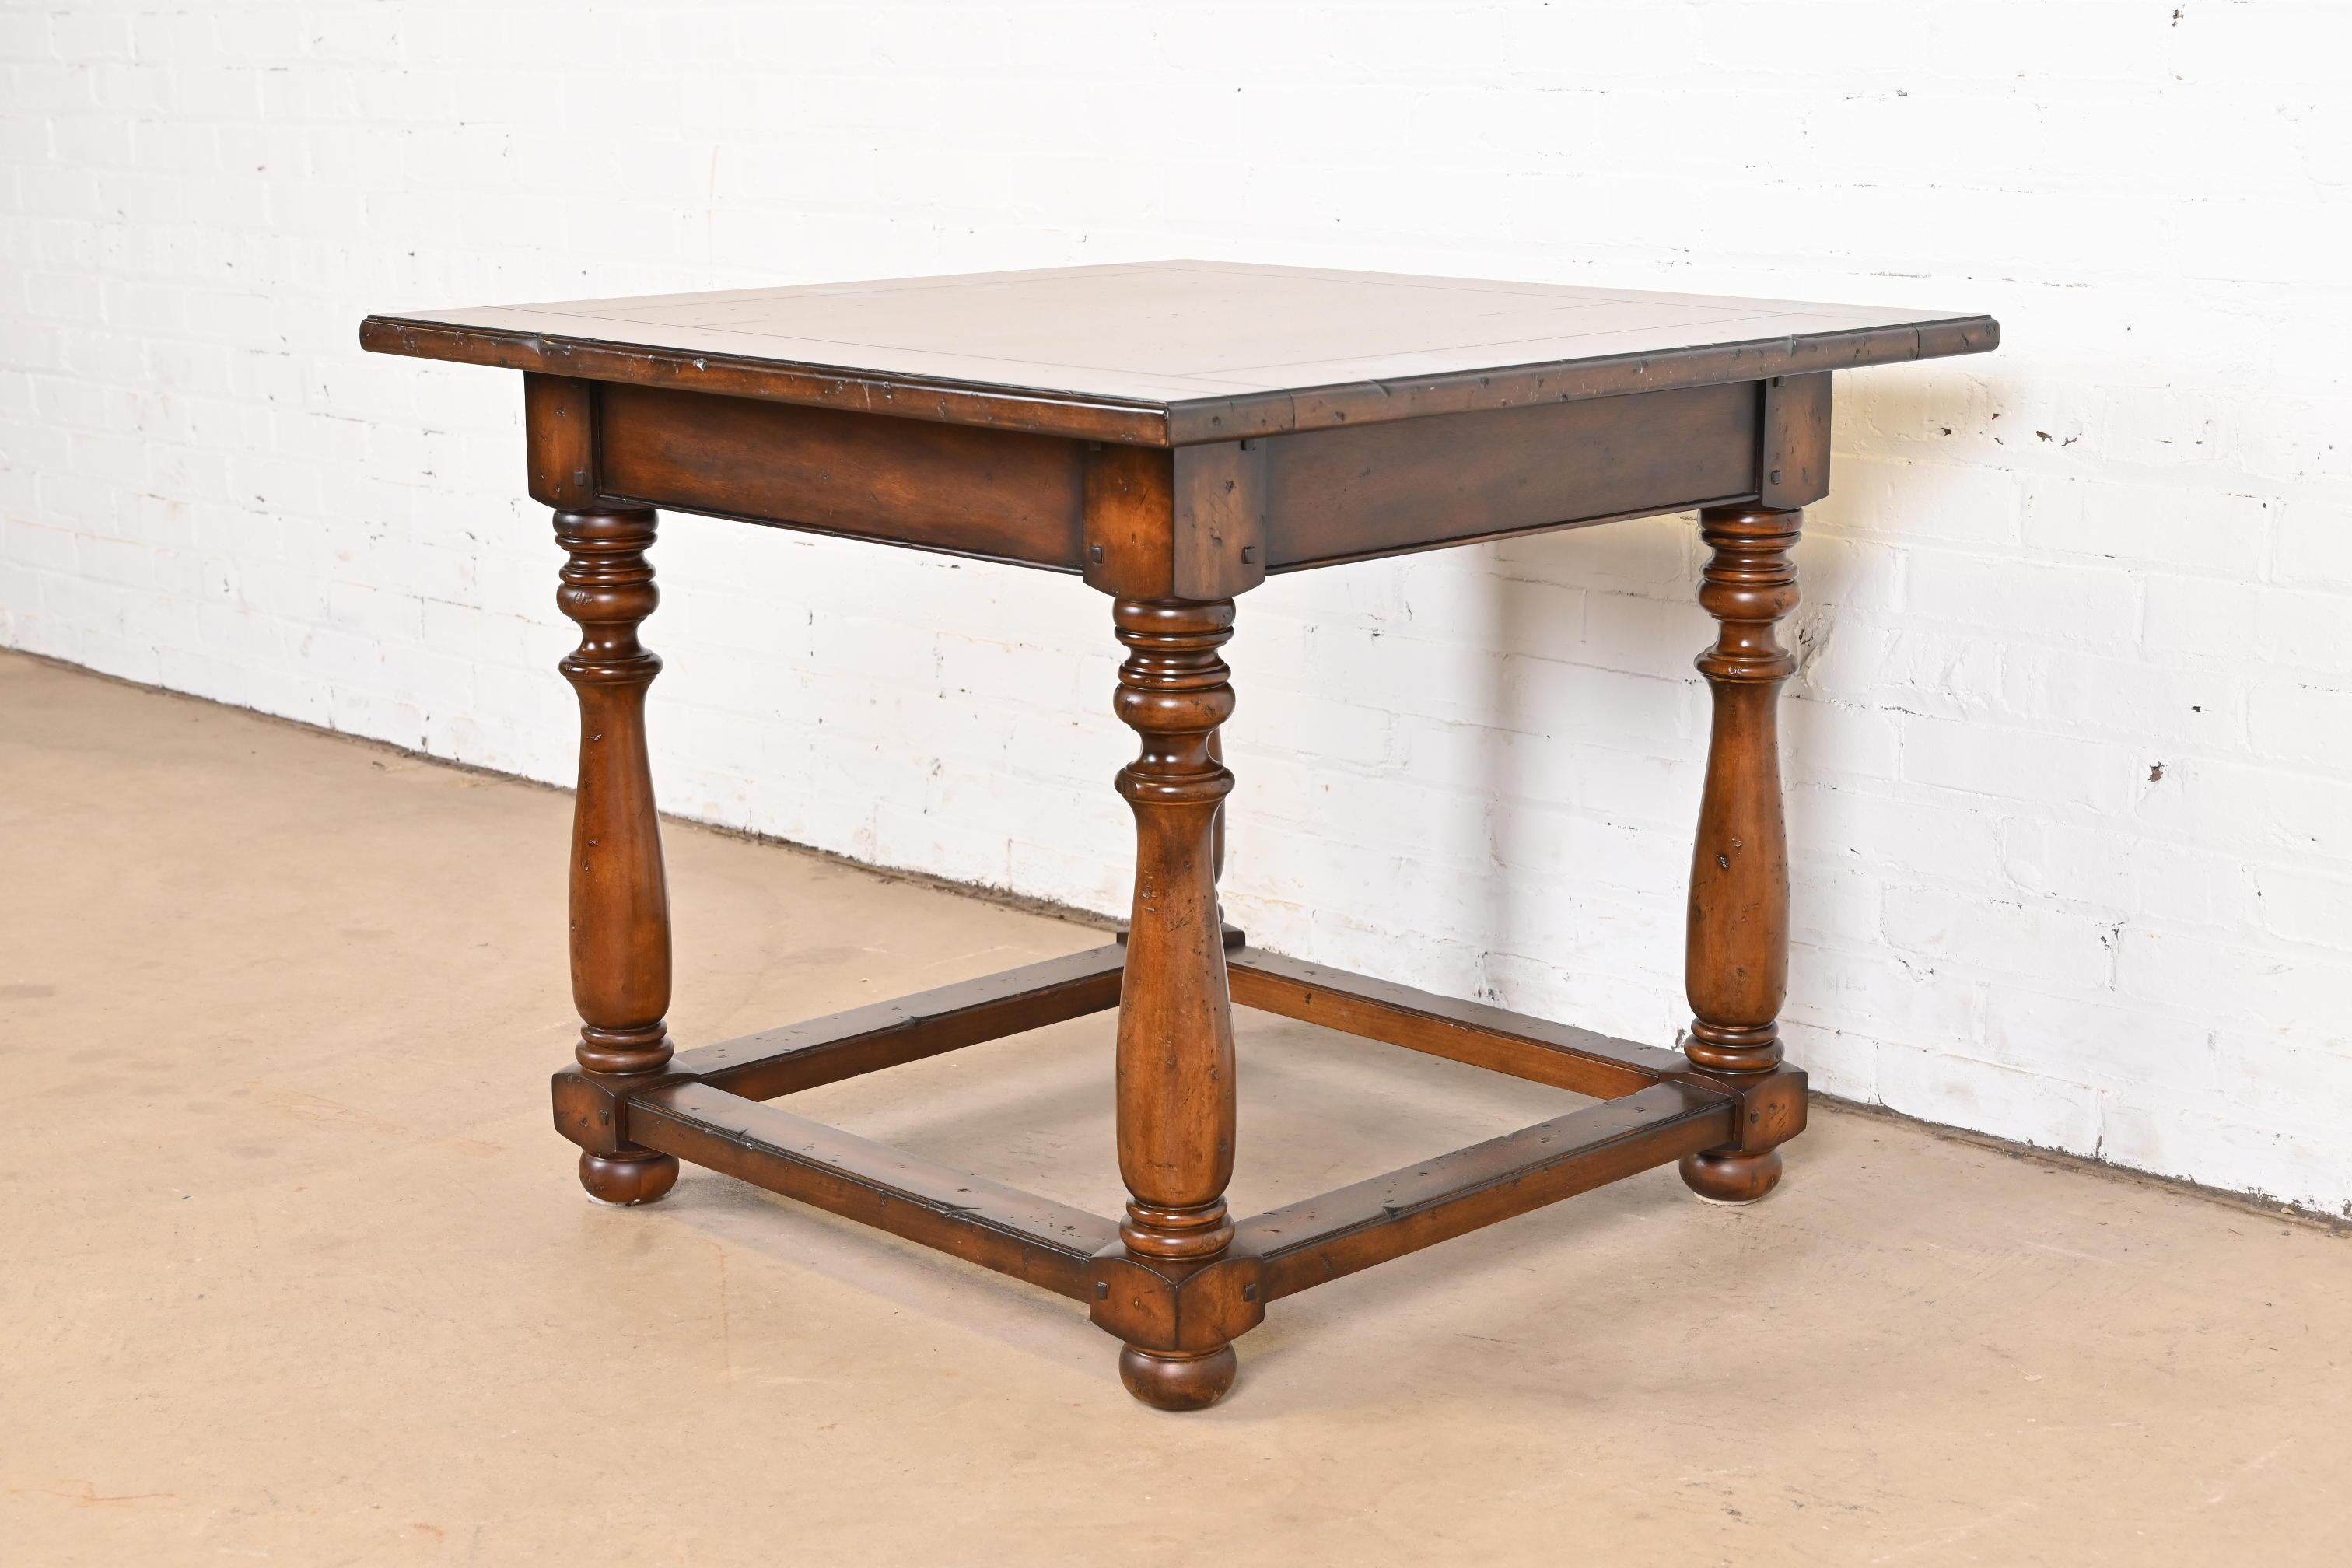 20th Century Ralph Lauren Rustic European Carved Walnut Side Table For Sale